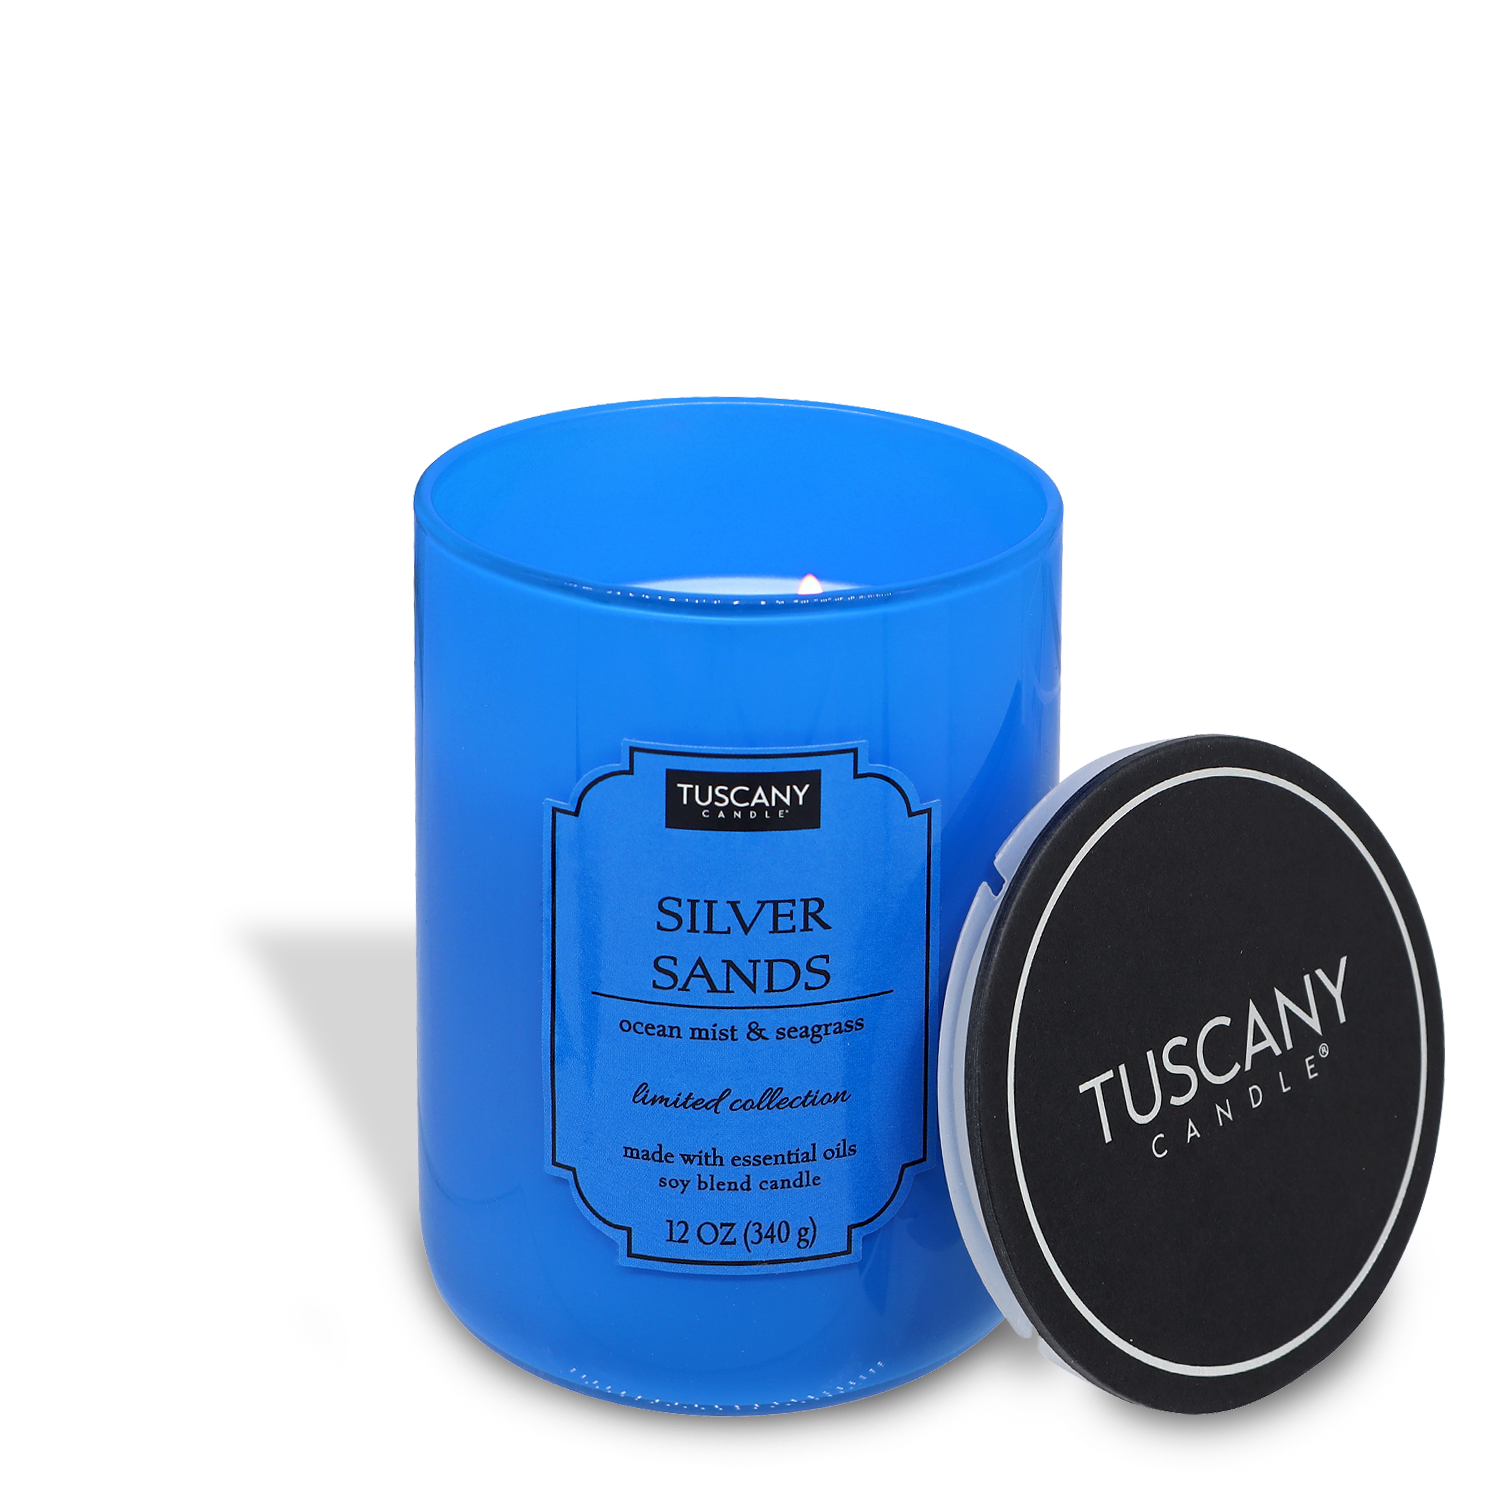 A lit blue "Silver Sands candle" with an open black lid lying next to it, on a white background.